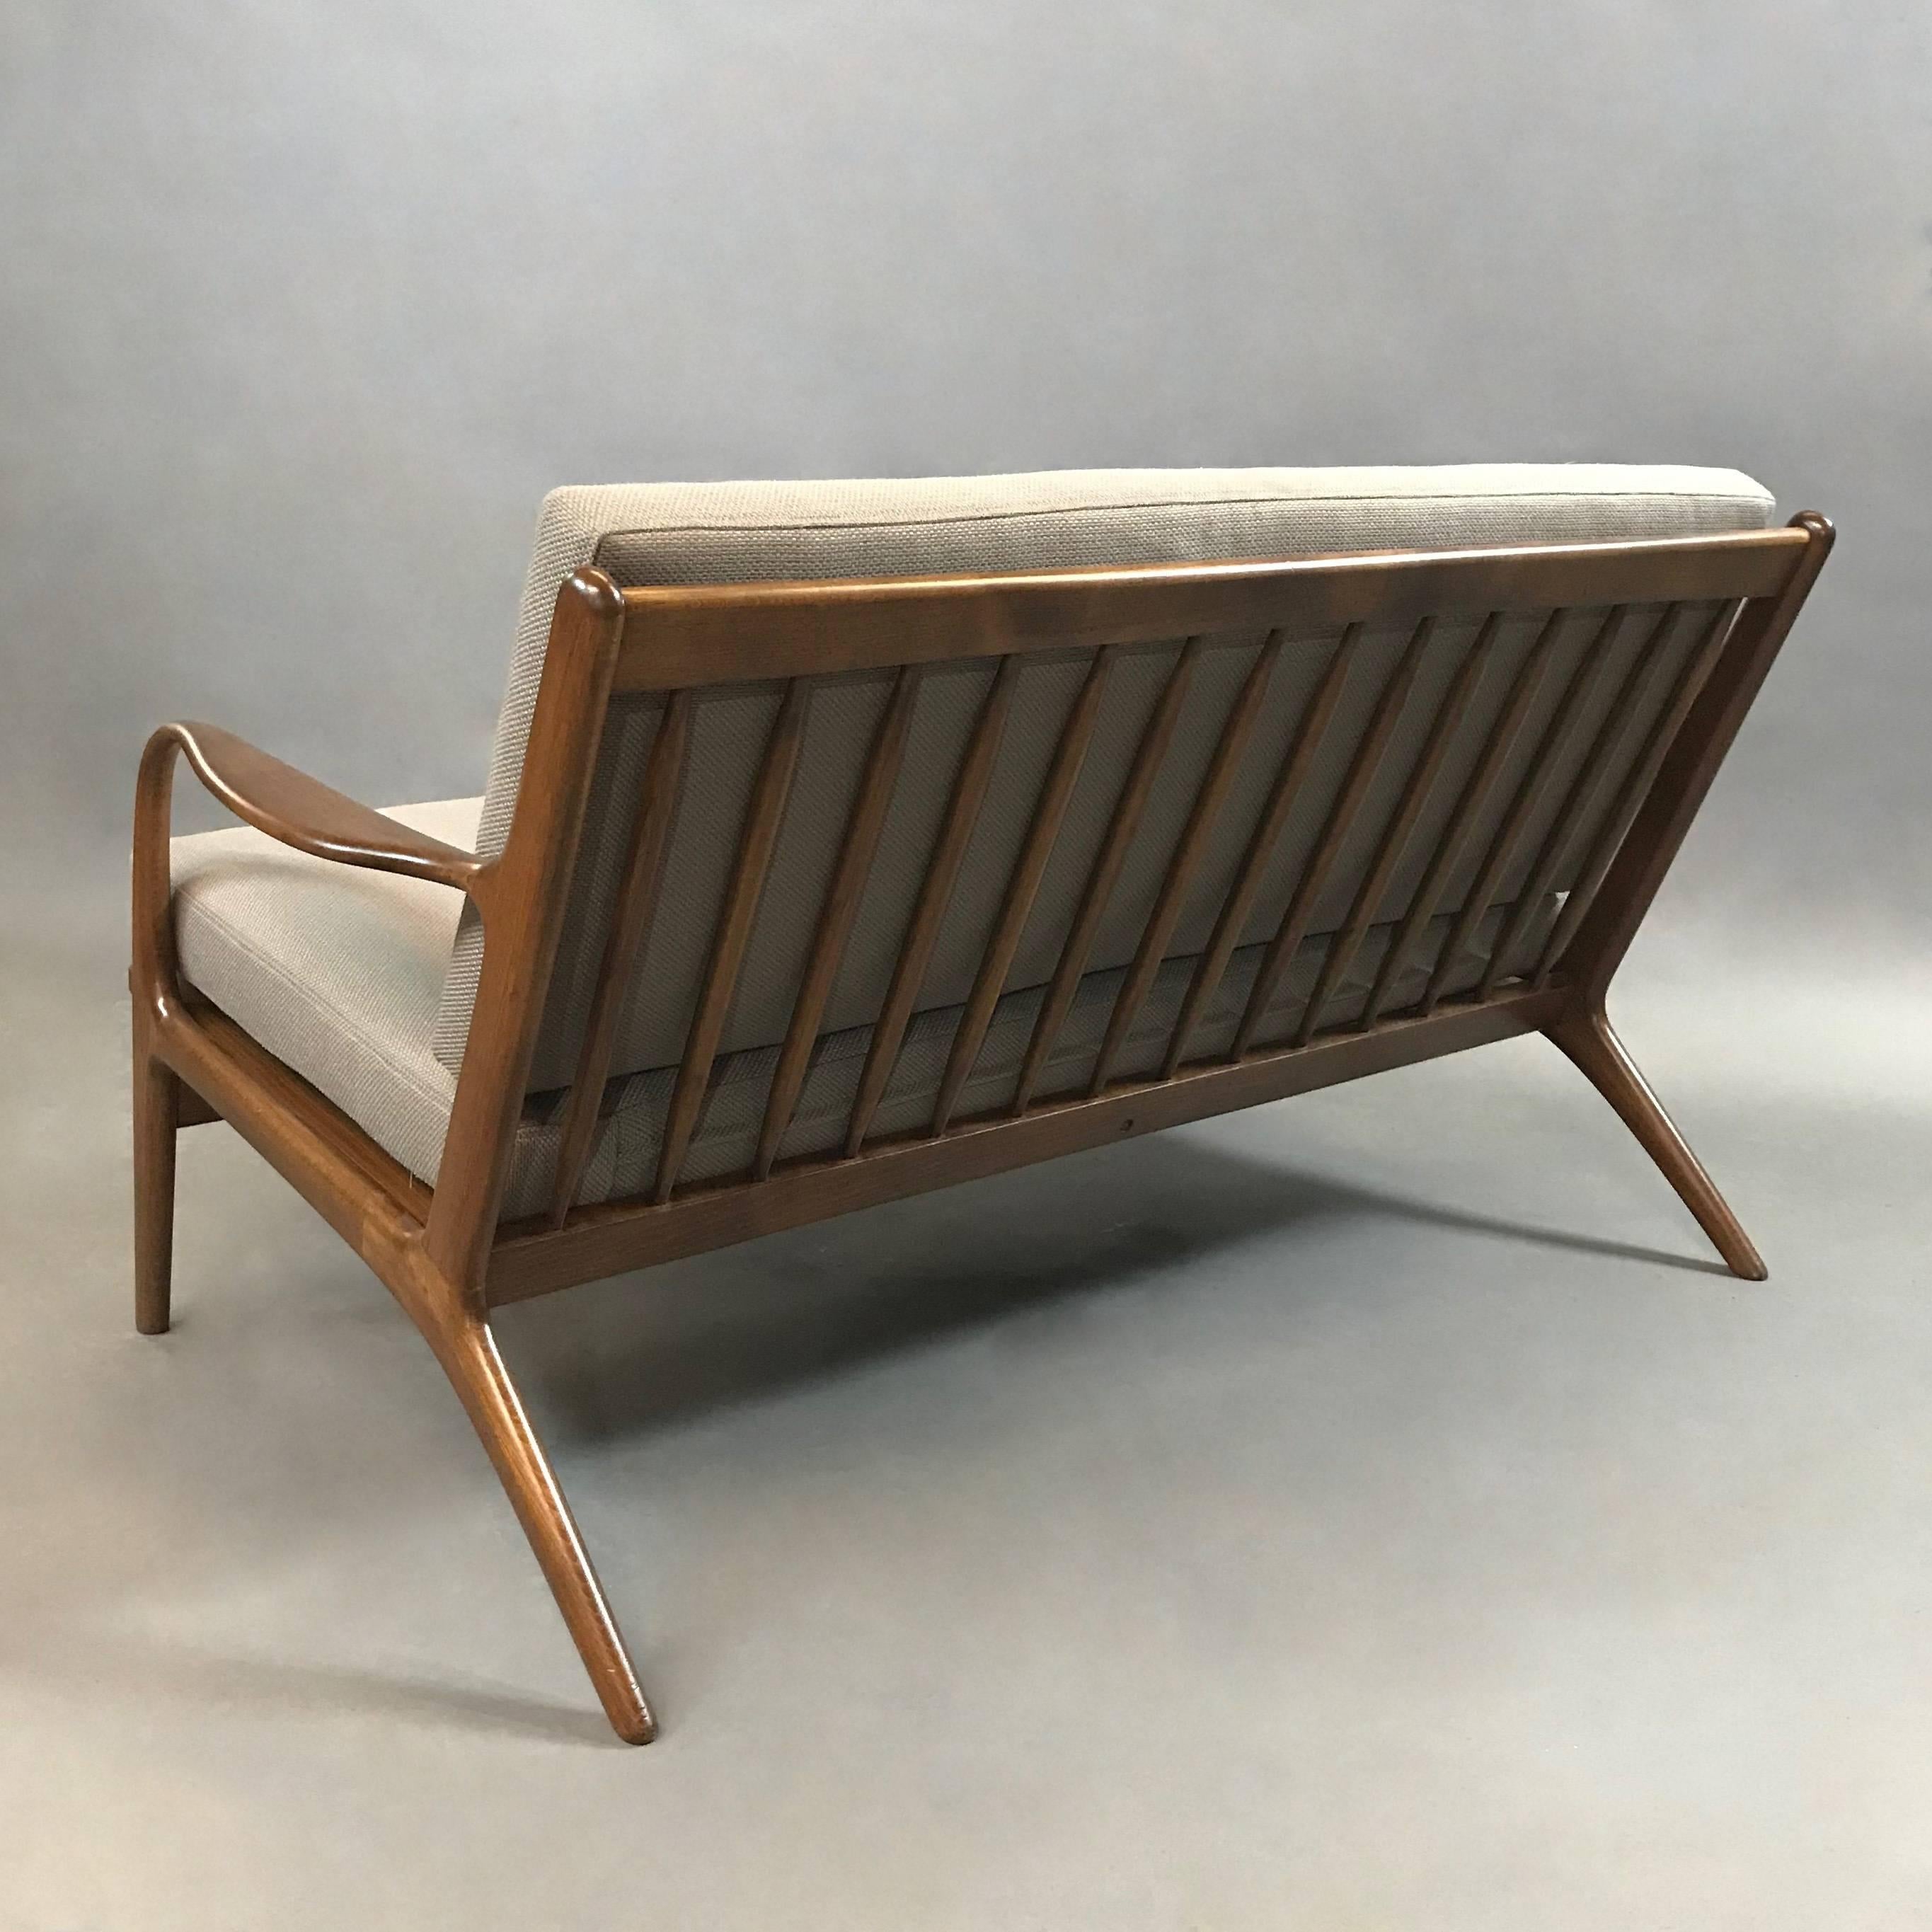 American Mid-Century Modern Maple Sofa by Adrian Pearsall for Craft Associates